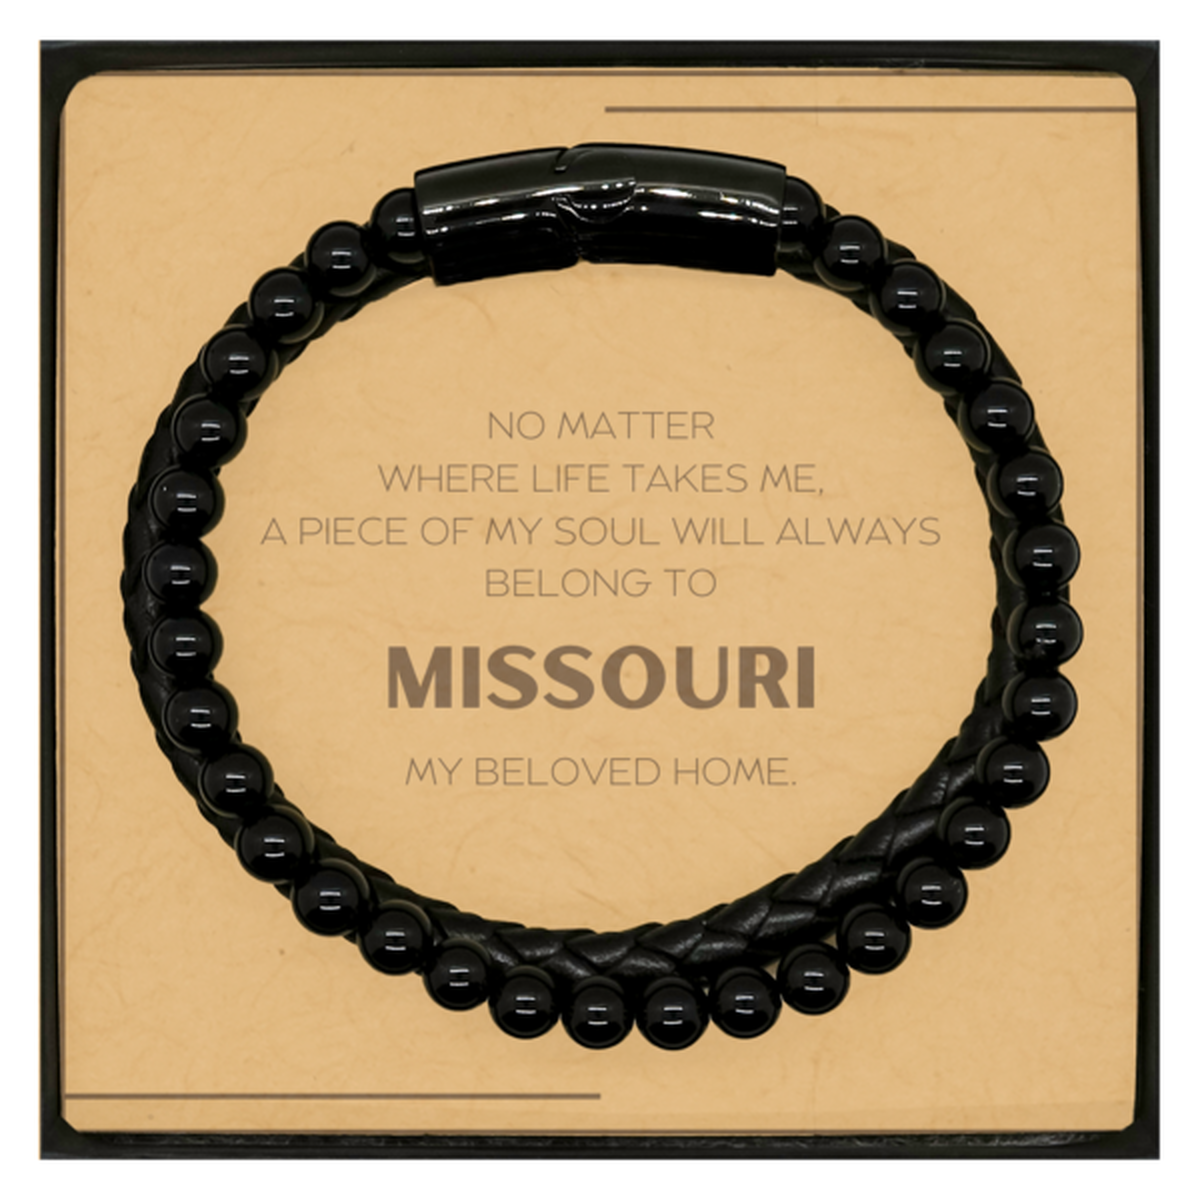 Love Missouri State Gifts, My soul will always belong to Missouri, Proud Stone Leather Bracelets, Birthday Christmas Unique Gifts For Missouri Men, Women, Friends